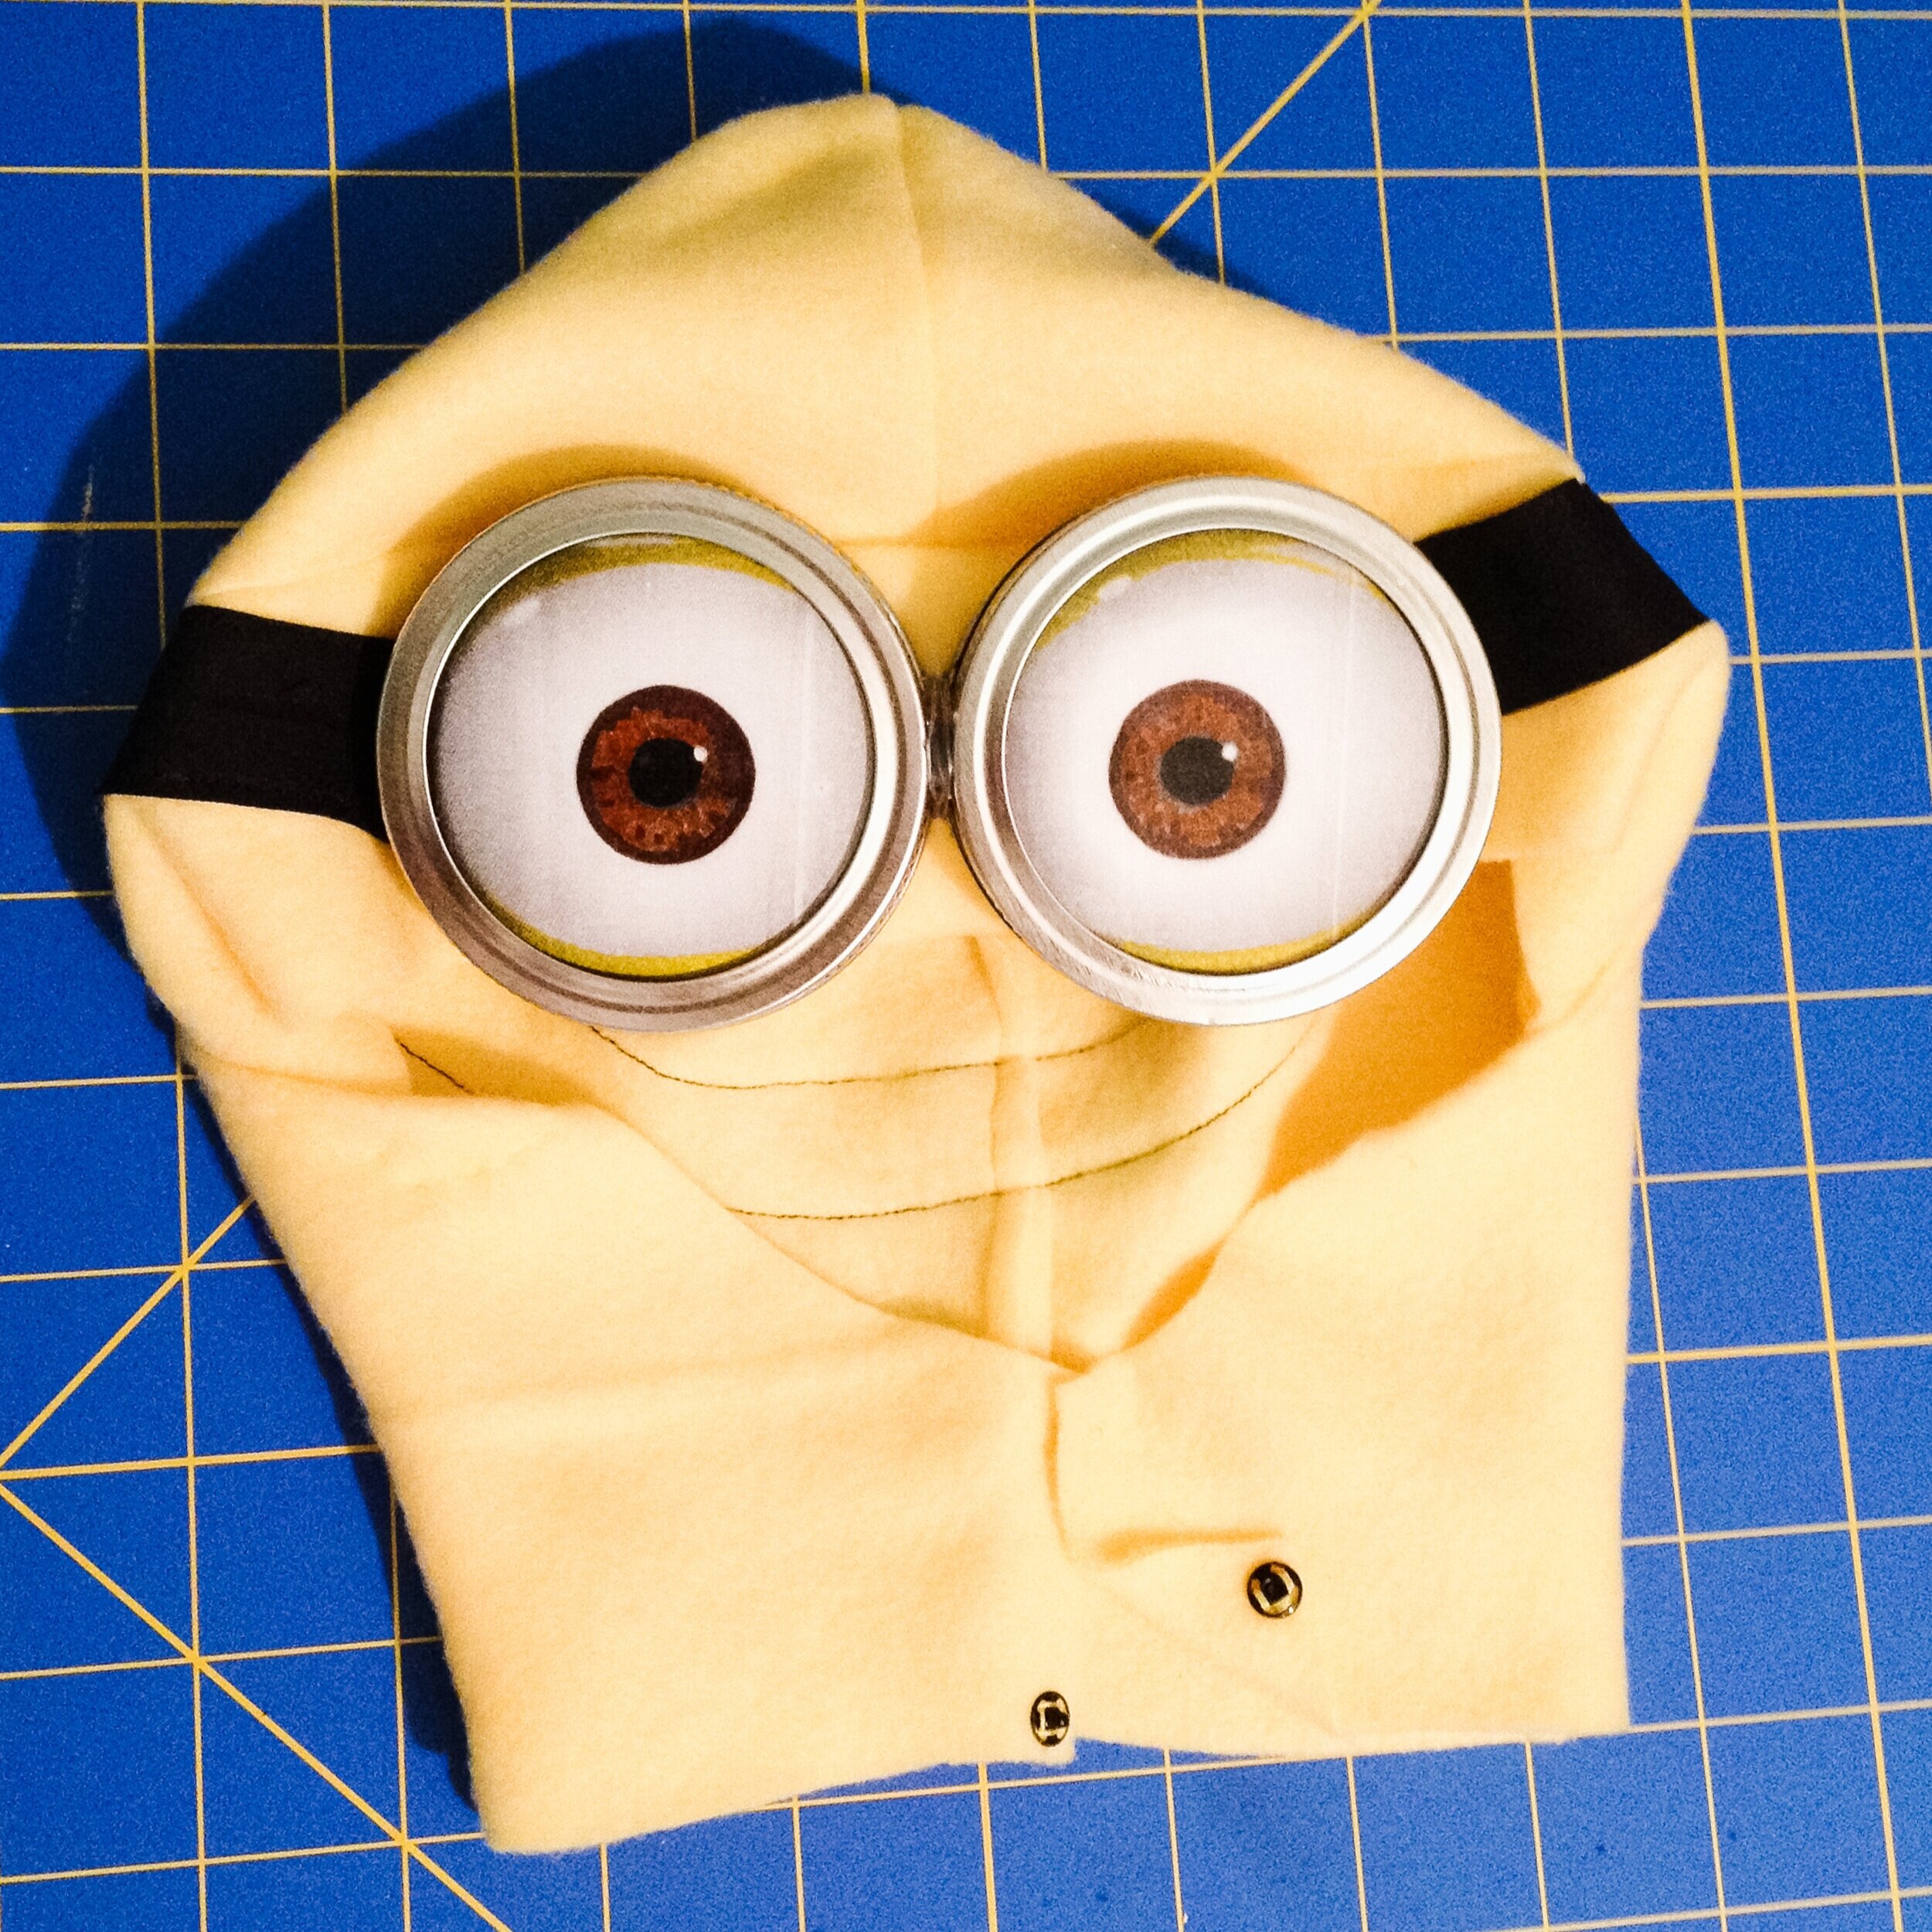 DIY  - KIDS COSTUME DIY: MINION - All Kids Are Gifted